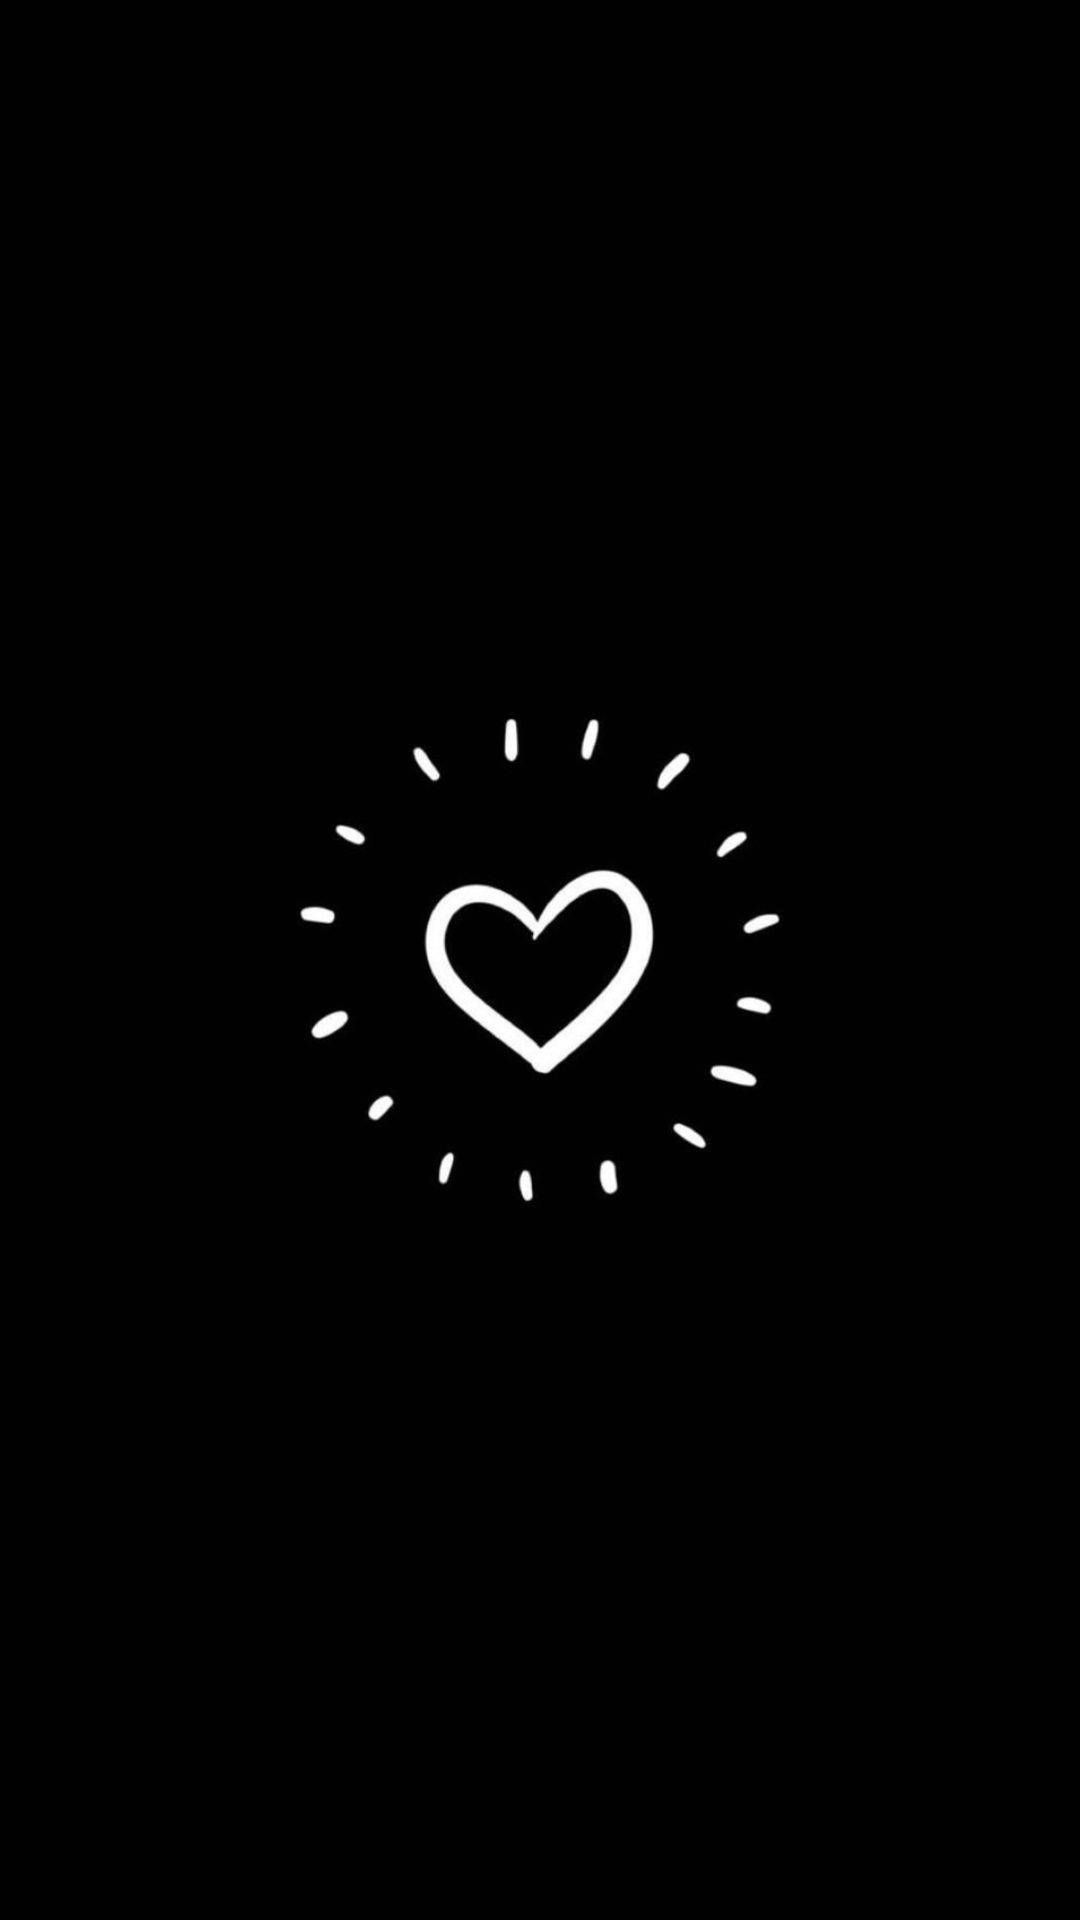 A black background with a white heart in the middle - Black heart